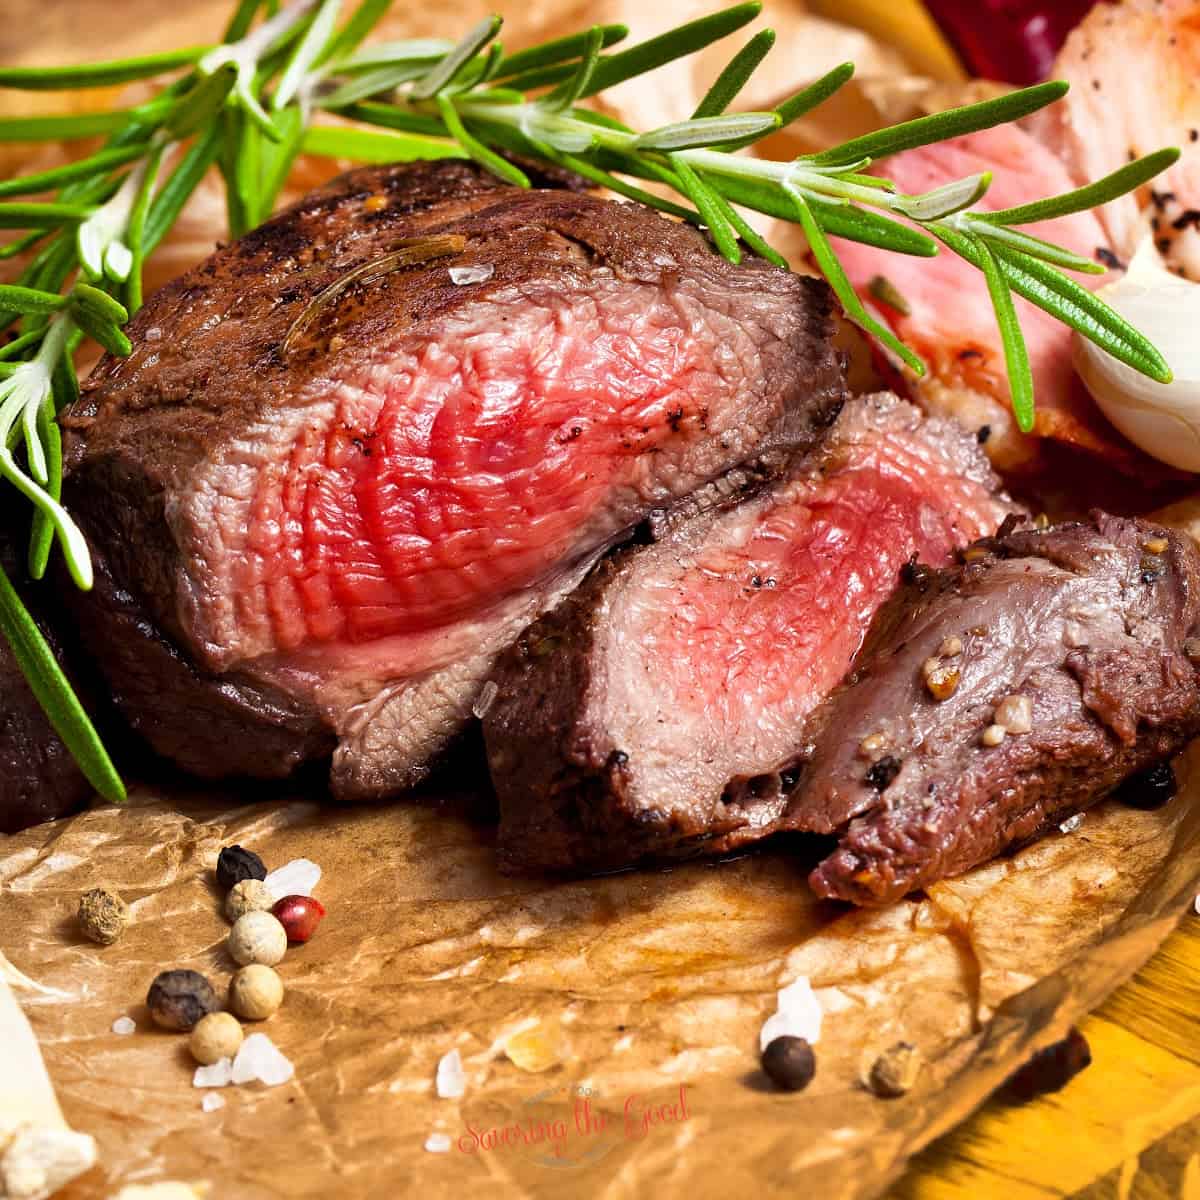 venison sliced on a cutting board with rosemary and whole peppercorn garnish.